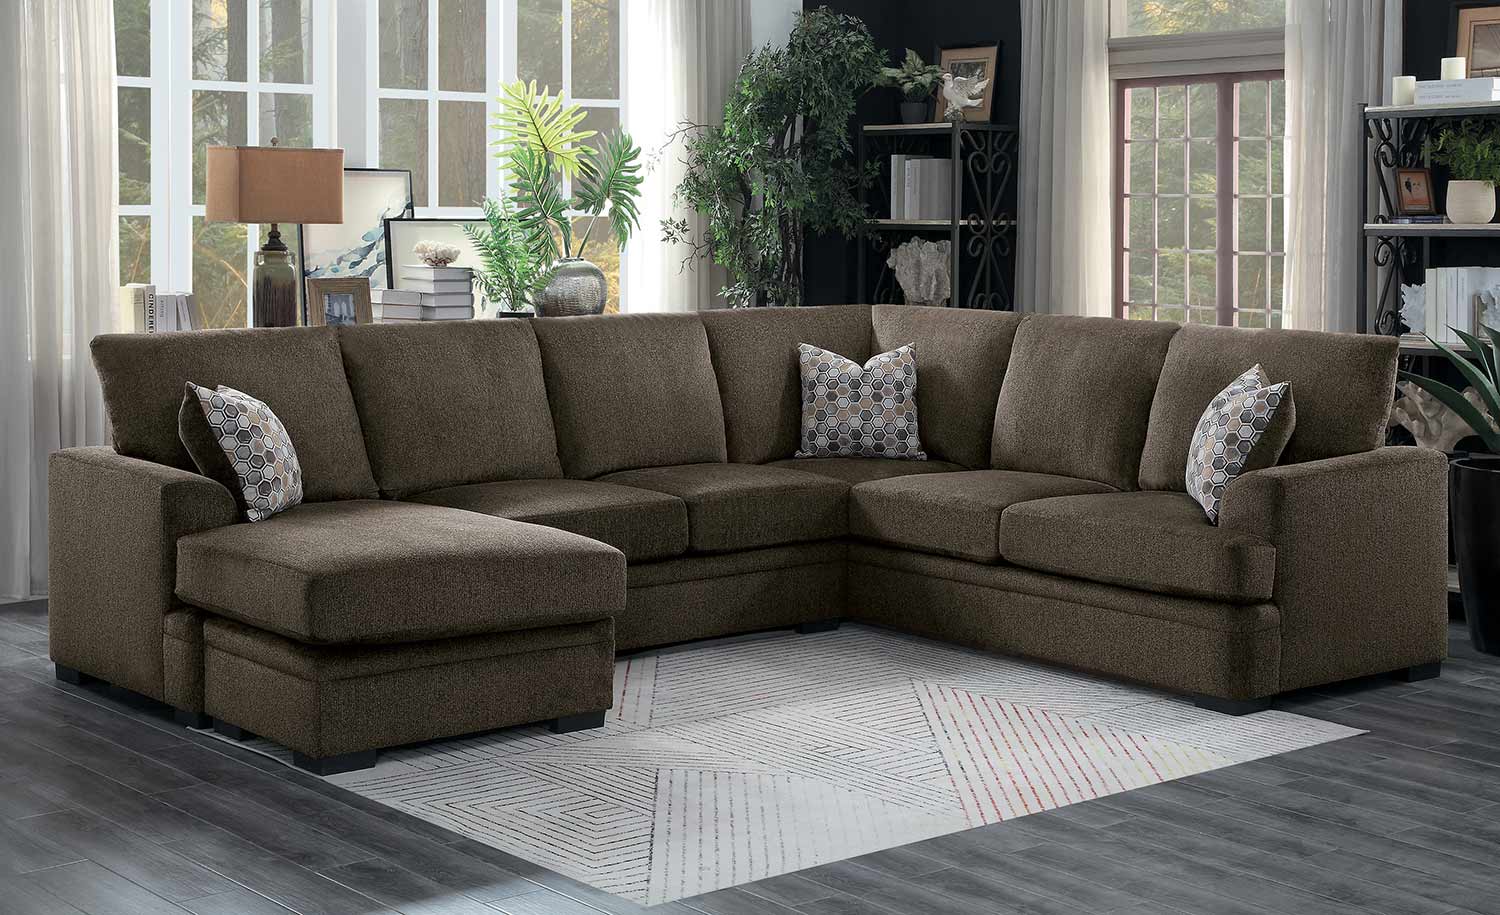 Homelegance Maddy Sectional Sofa Set - Brown